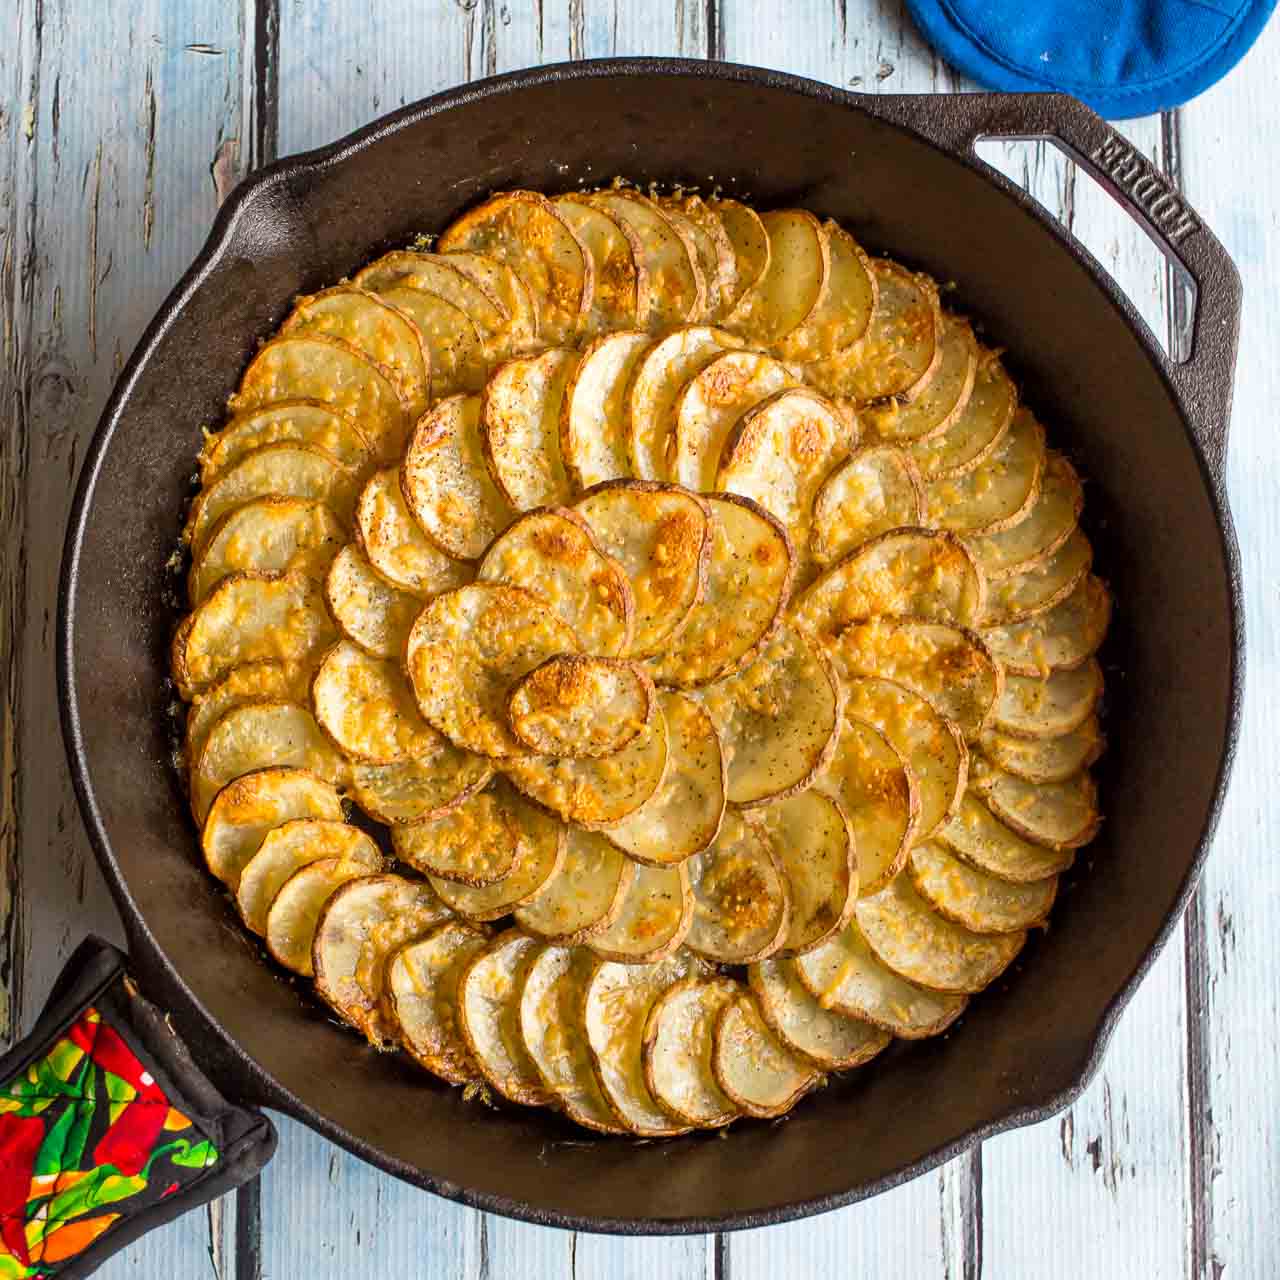 Cast iron skillet with a spiral of potatoes